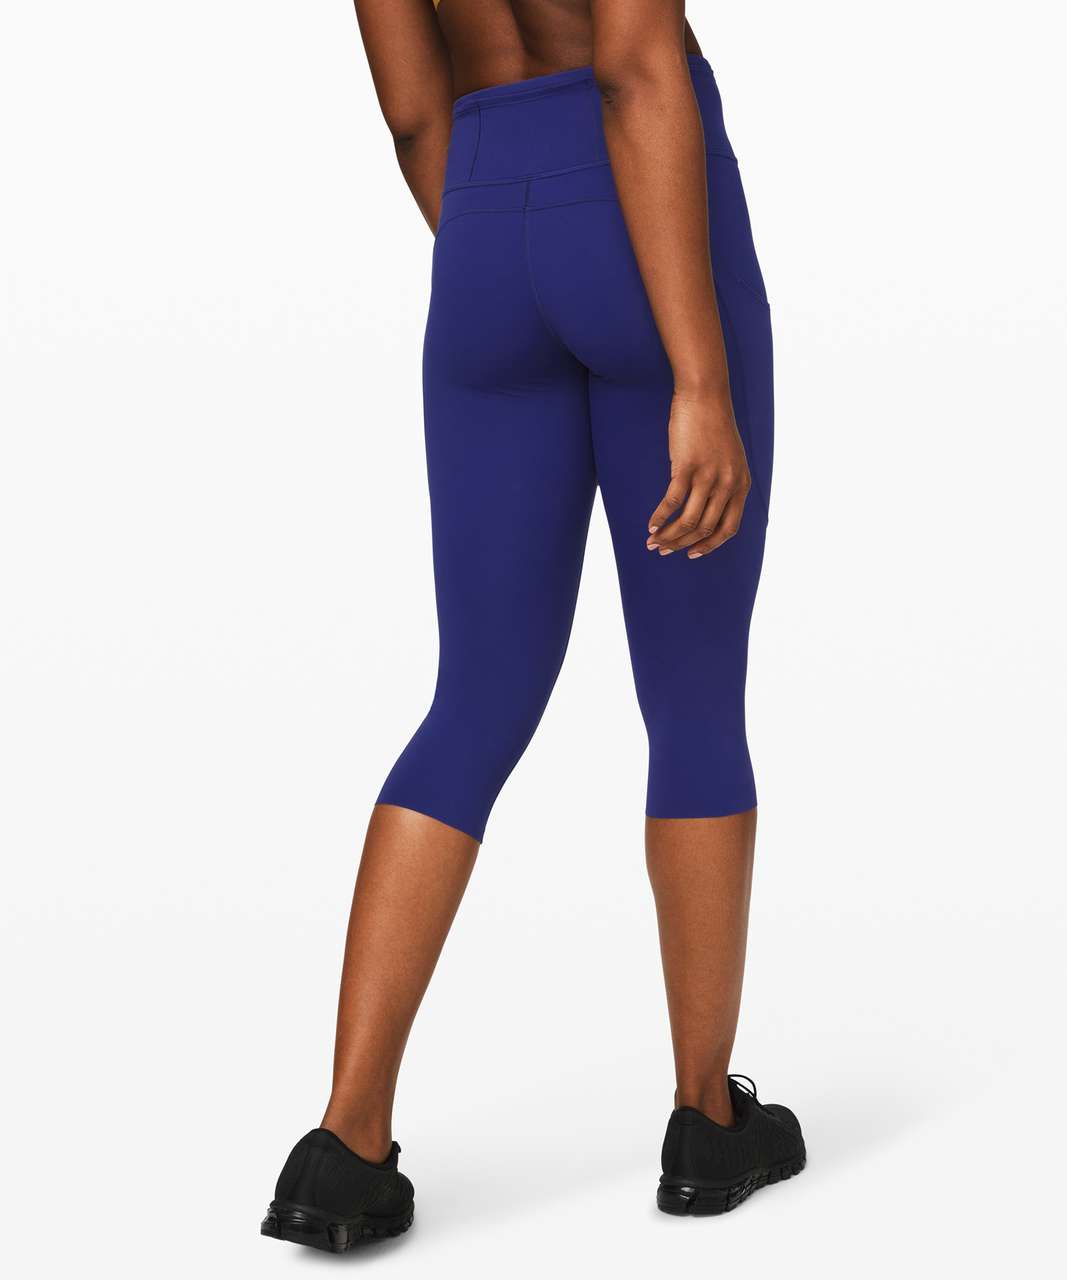 Lululemon Fast and Free Crop II 19" *Non-Reflective - Larkspur